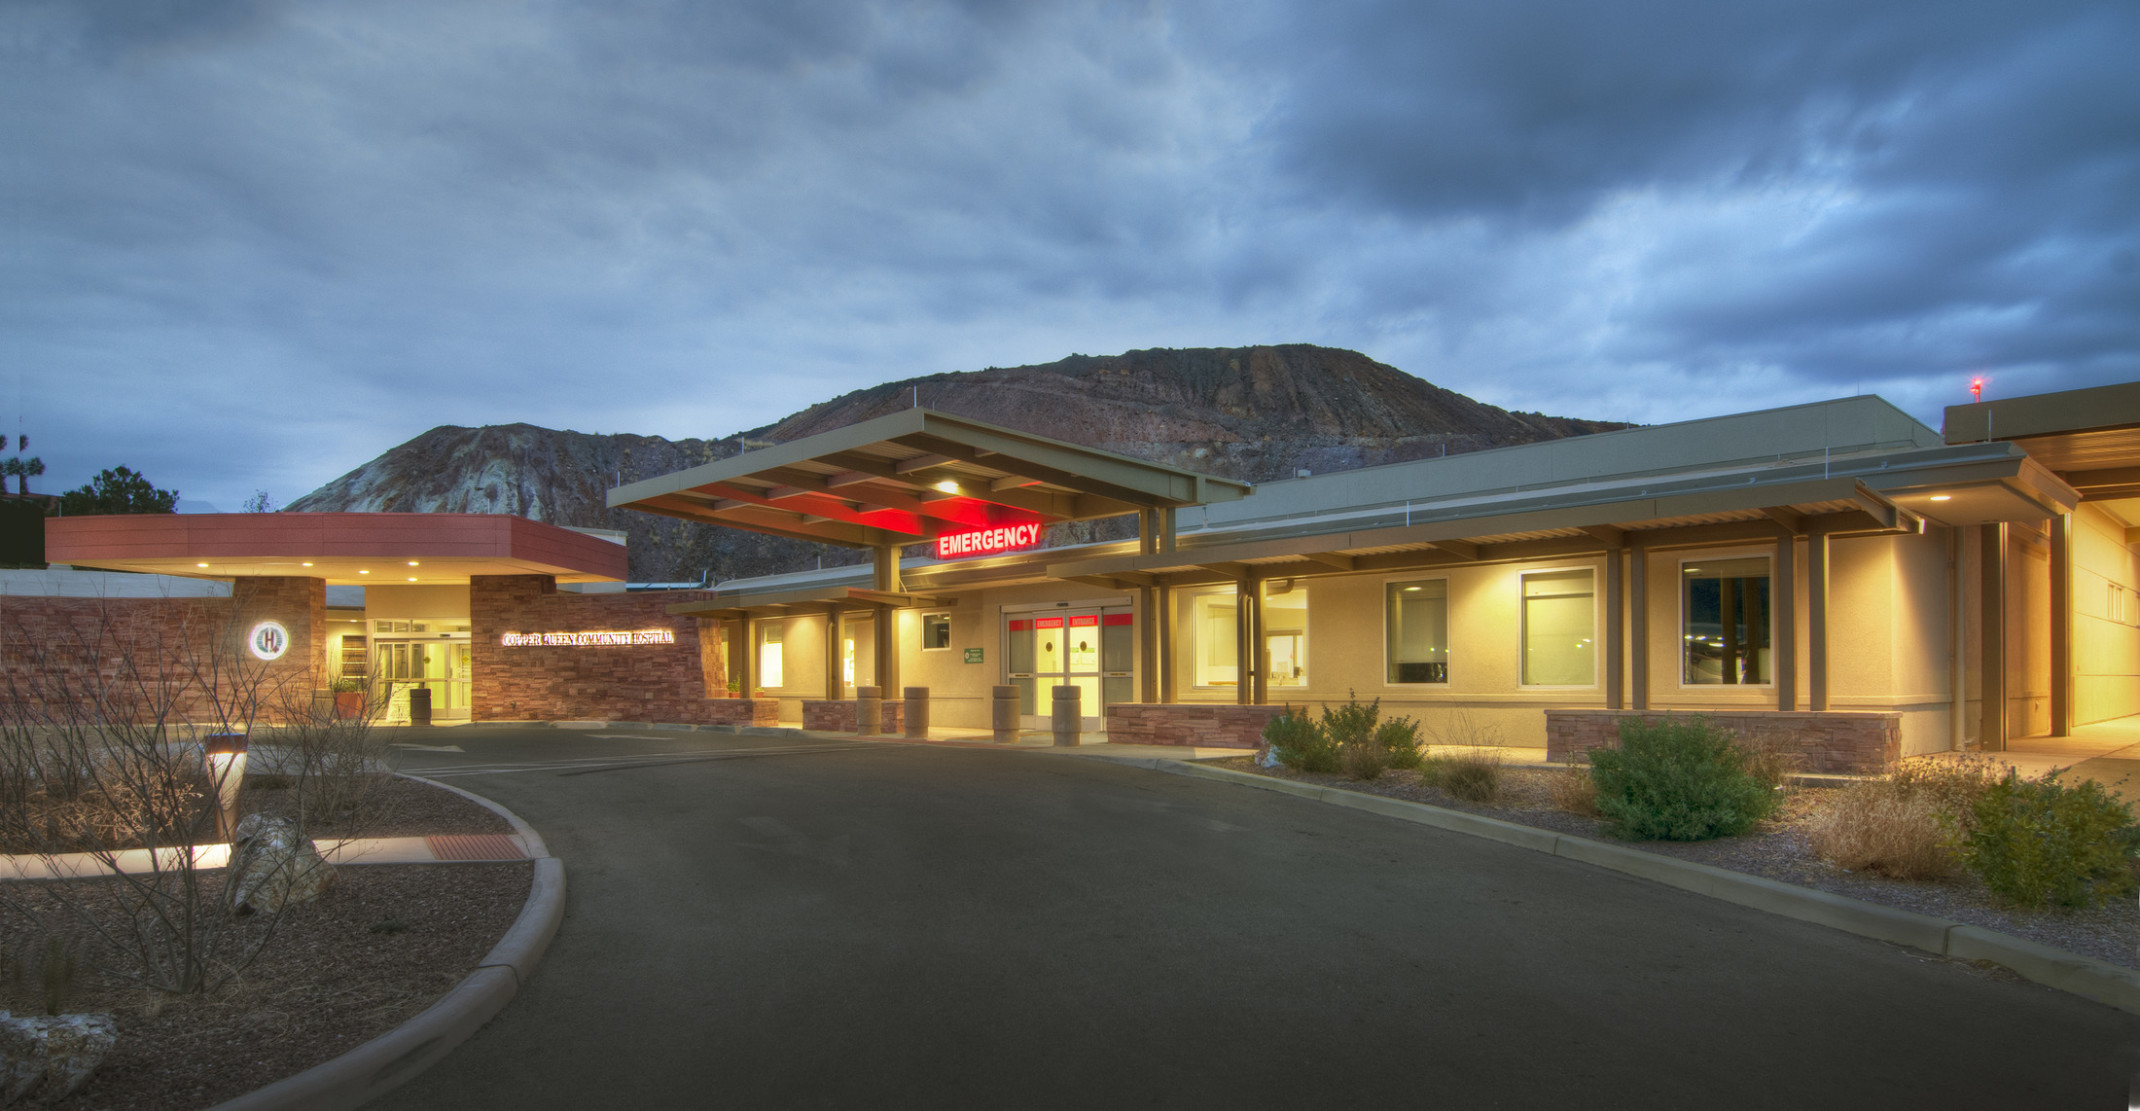 Exterior view of the Copper Queen Community Hospital Emergency Room entrance illuminated at night in front of mountain